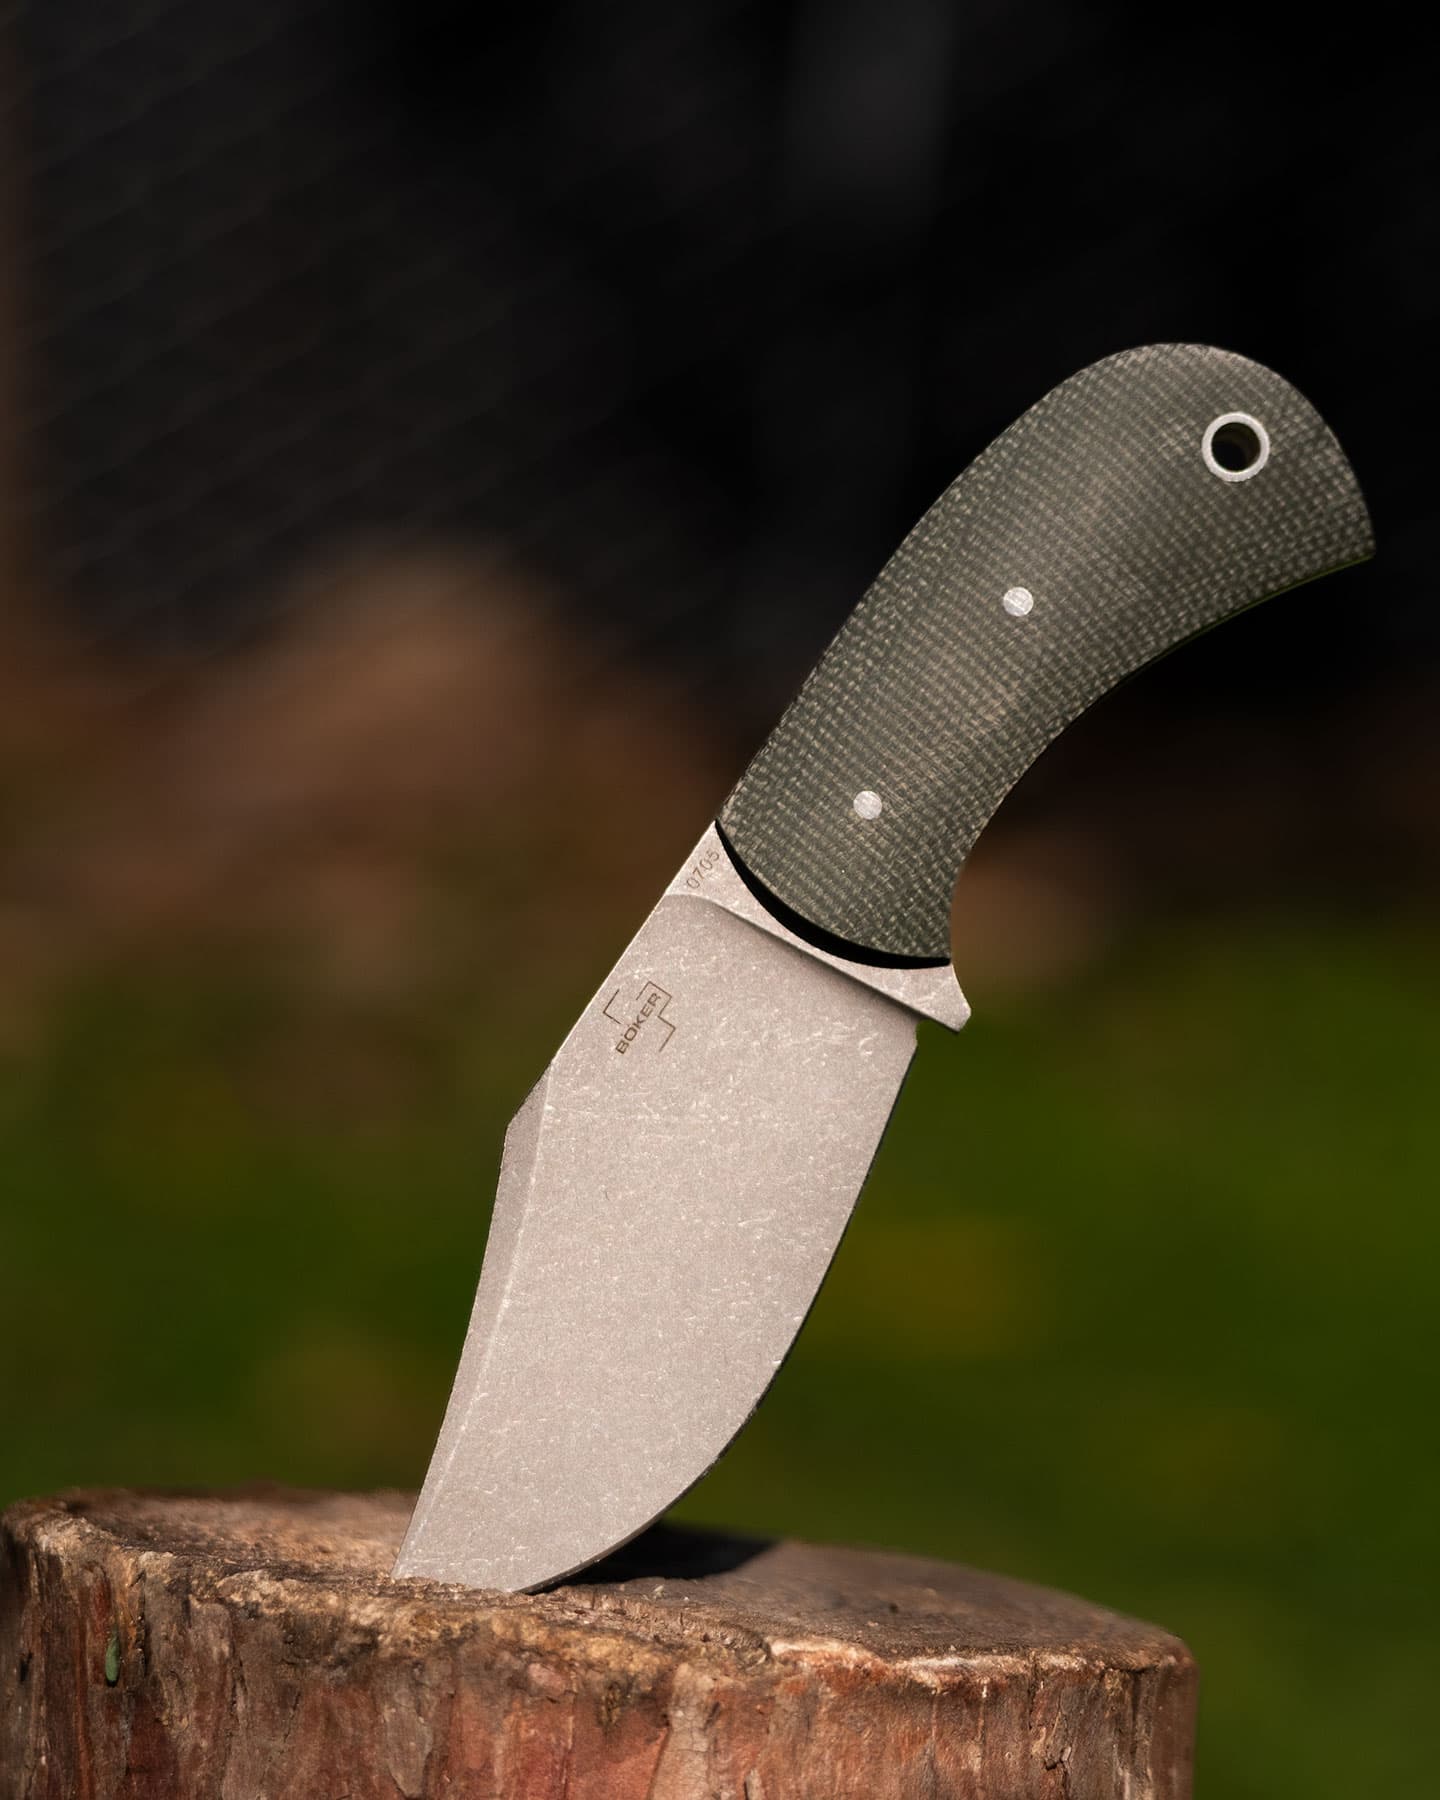 The Boker Plus Madman with green Micarta handle scales sticking out of a tree stump.